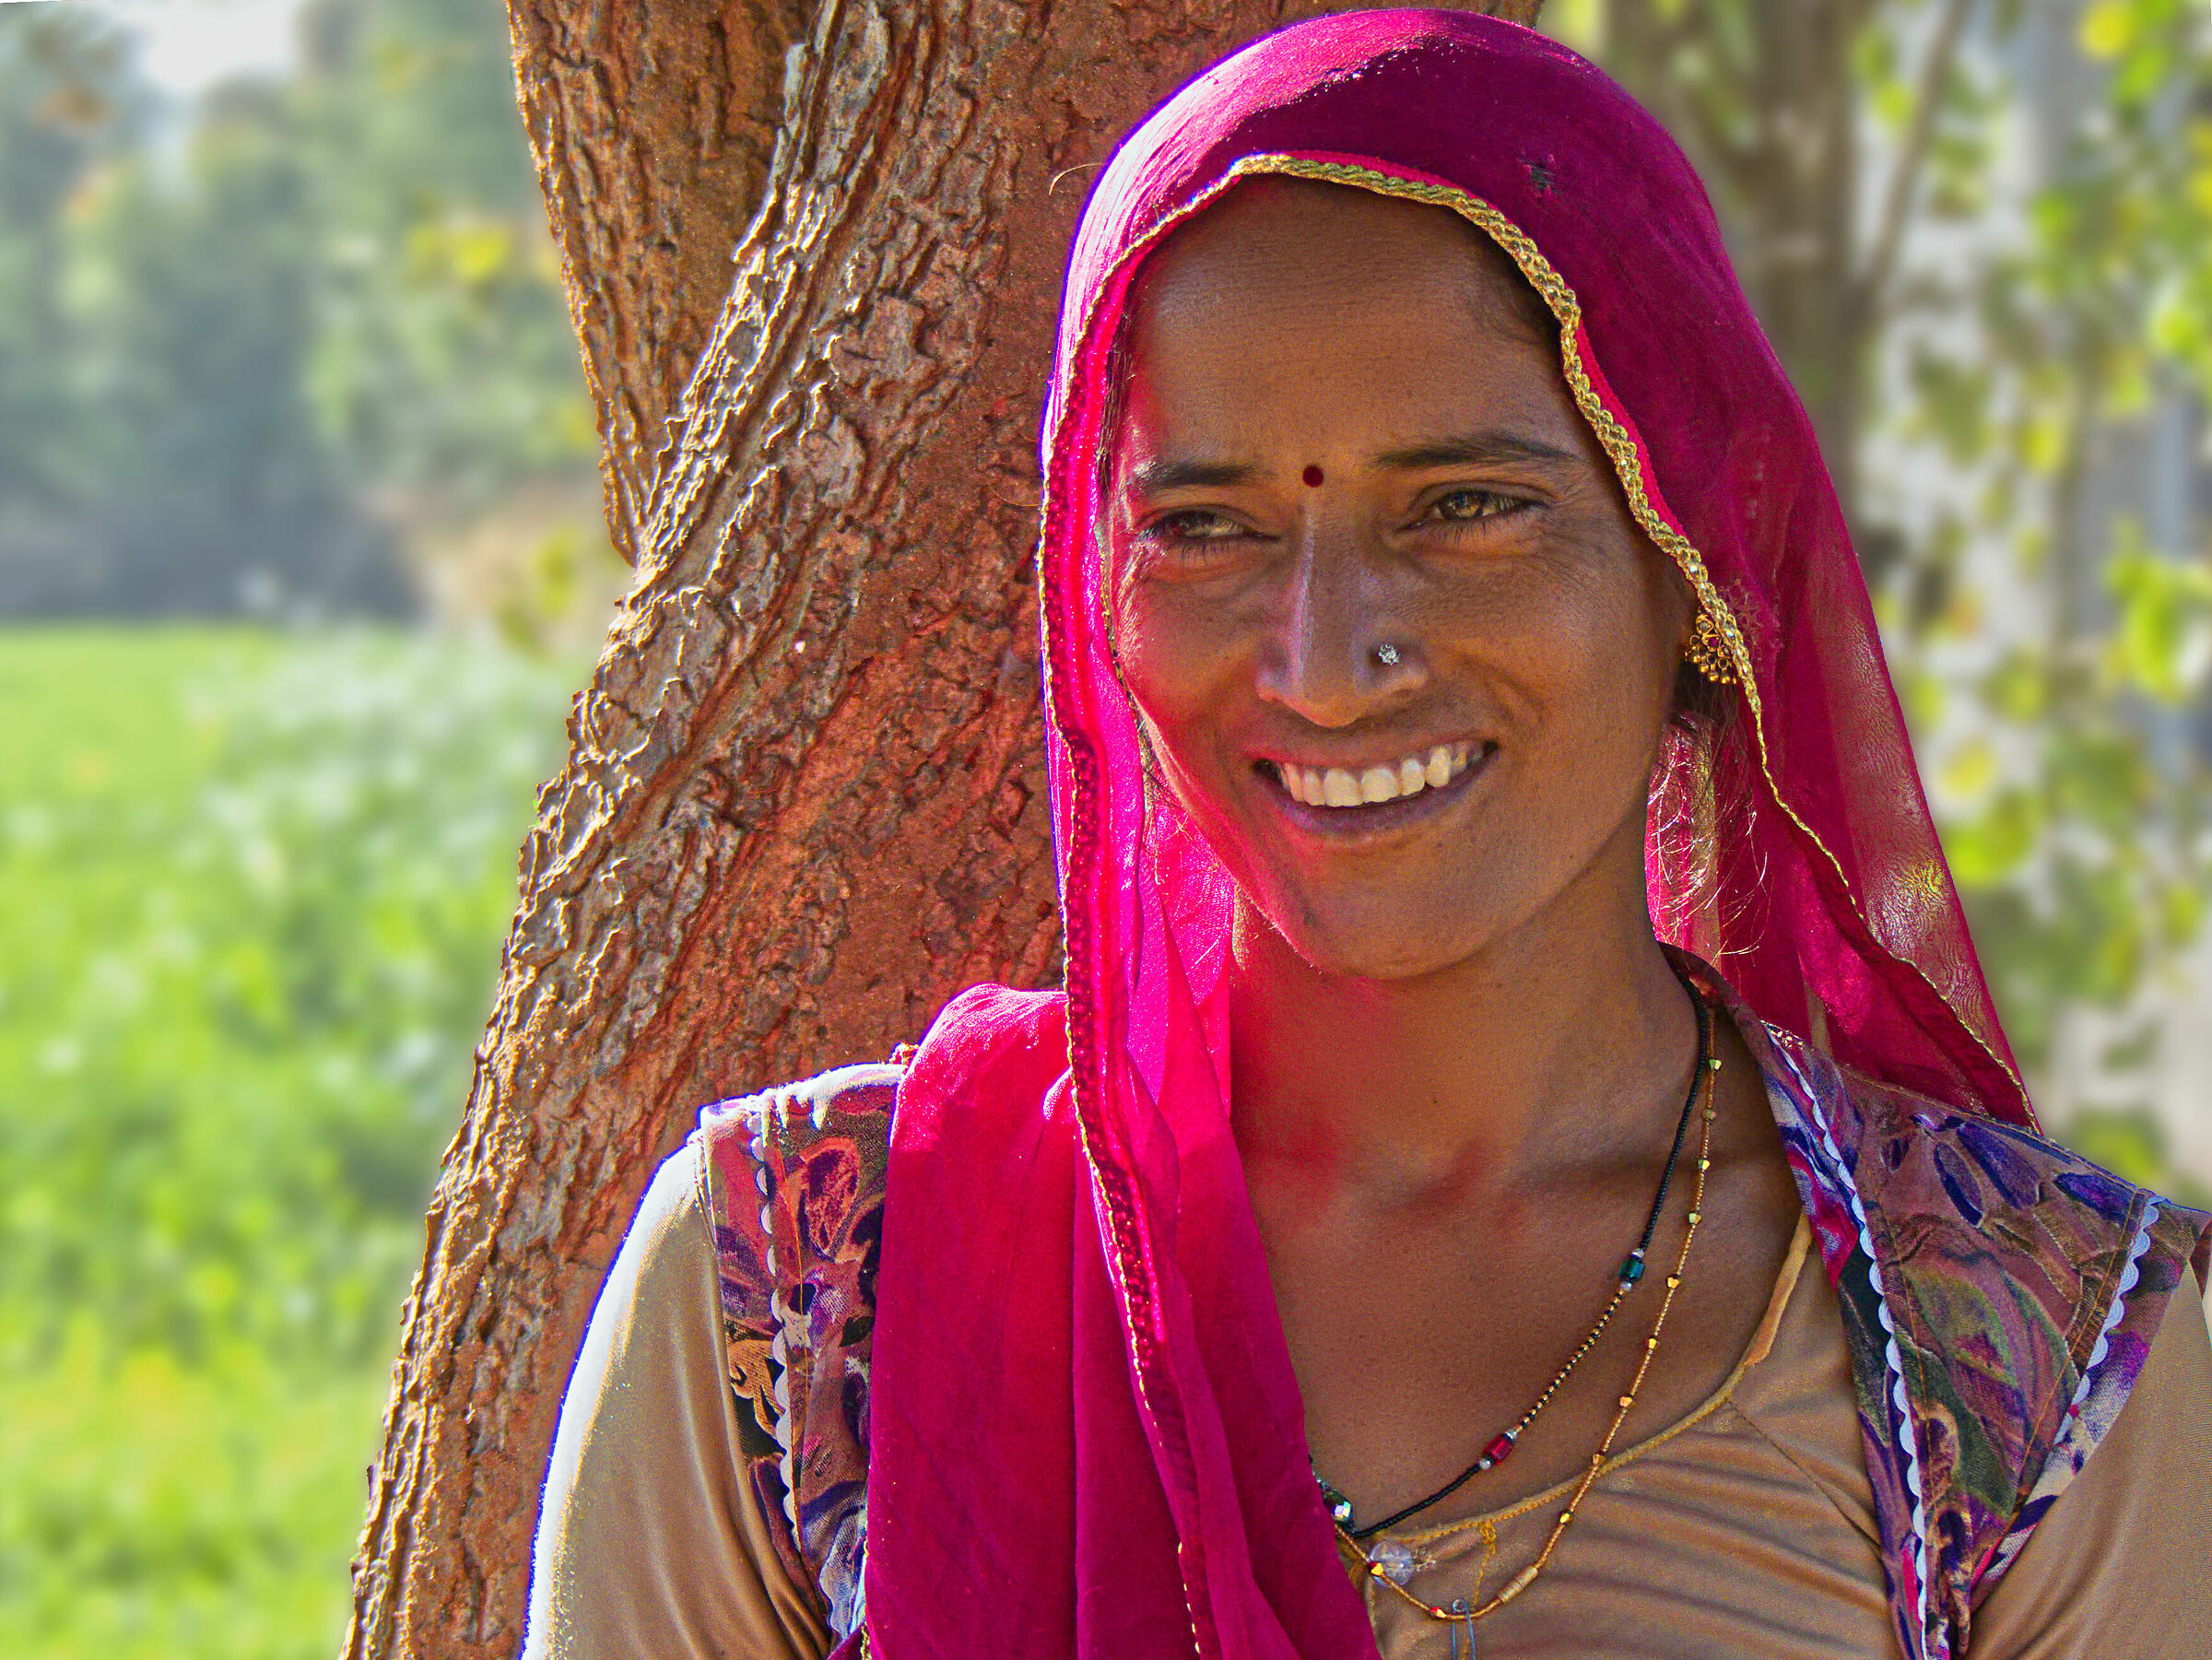 Smile from Rajasthan...